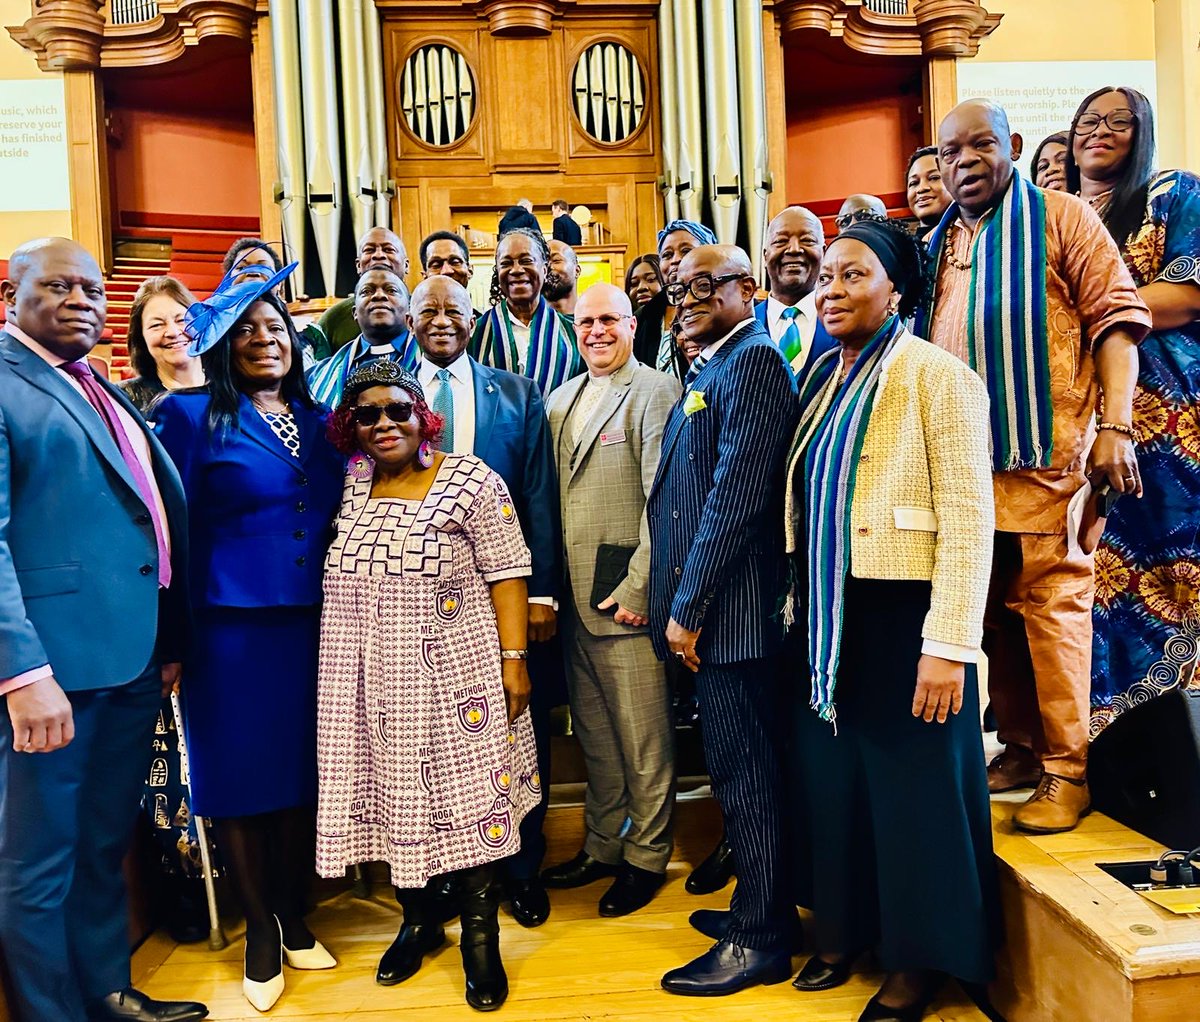 This morning, HC Dr. Morie Manyeh & Deputy HC, Mrs. Yvonne King Odigboh, attended a mass at the Methodist Central Hall in London. Prayers were offered for H.E. Pres. J.M Bio, the People, & the Government of S/Leone, on the occasion of the country’s 63rd Independence Anniversary.